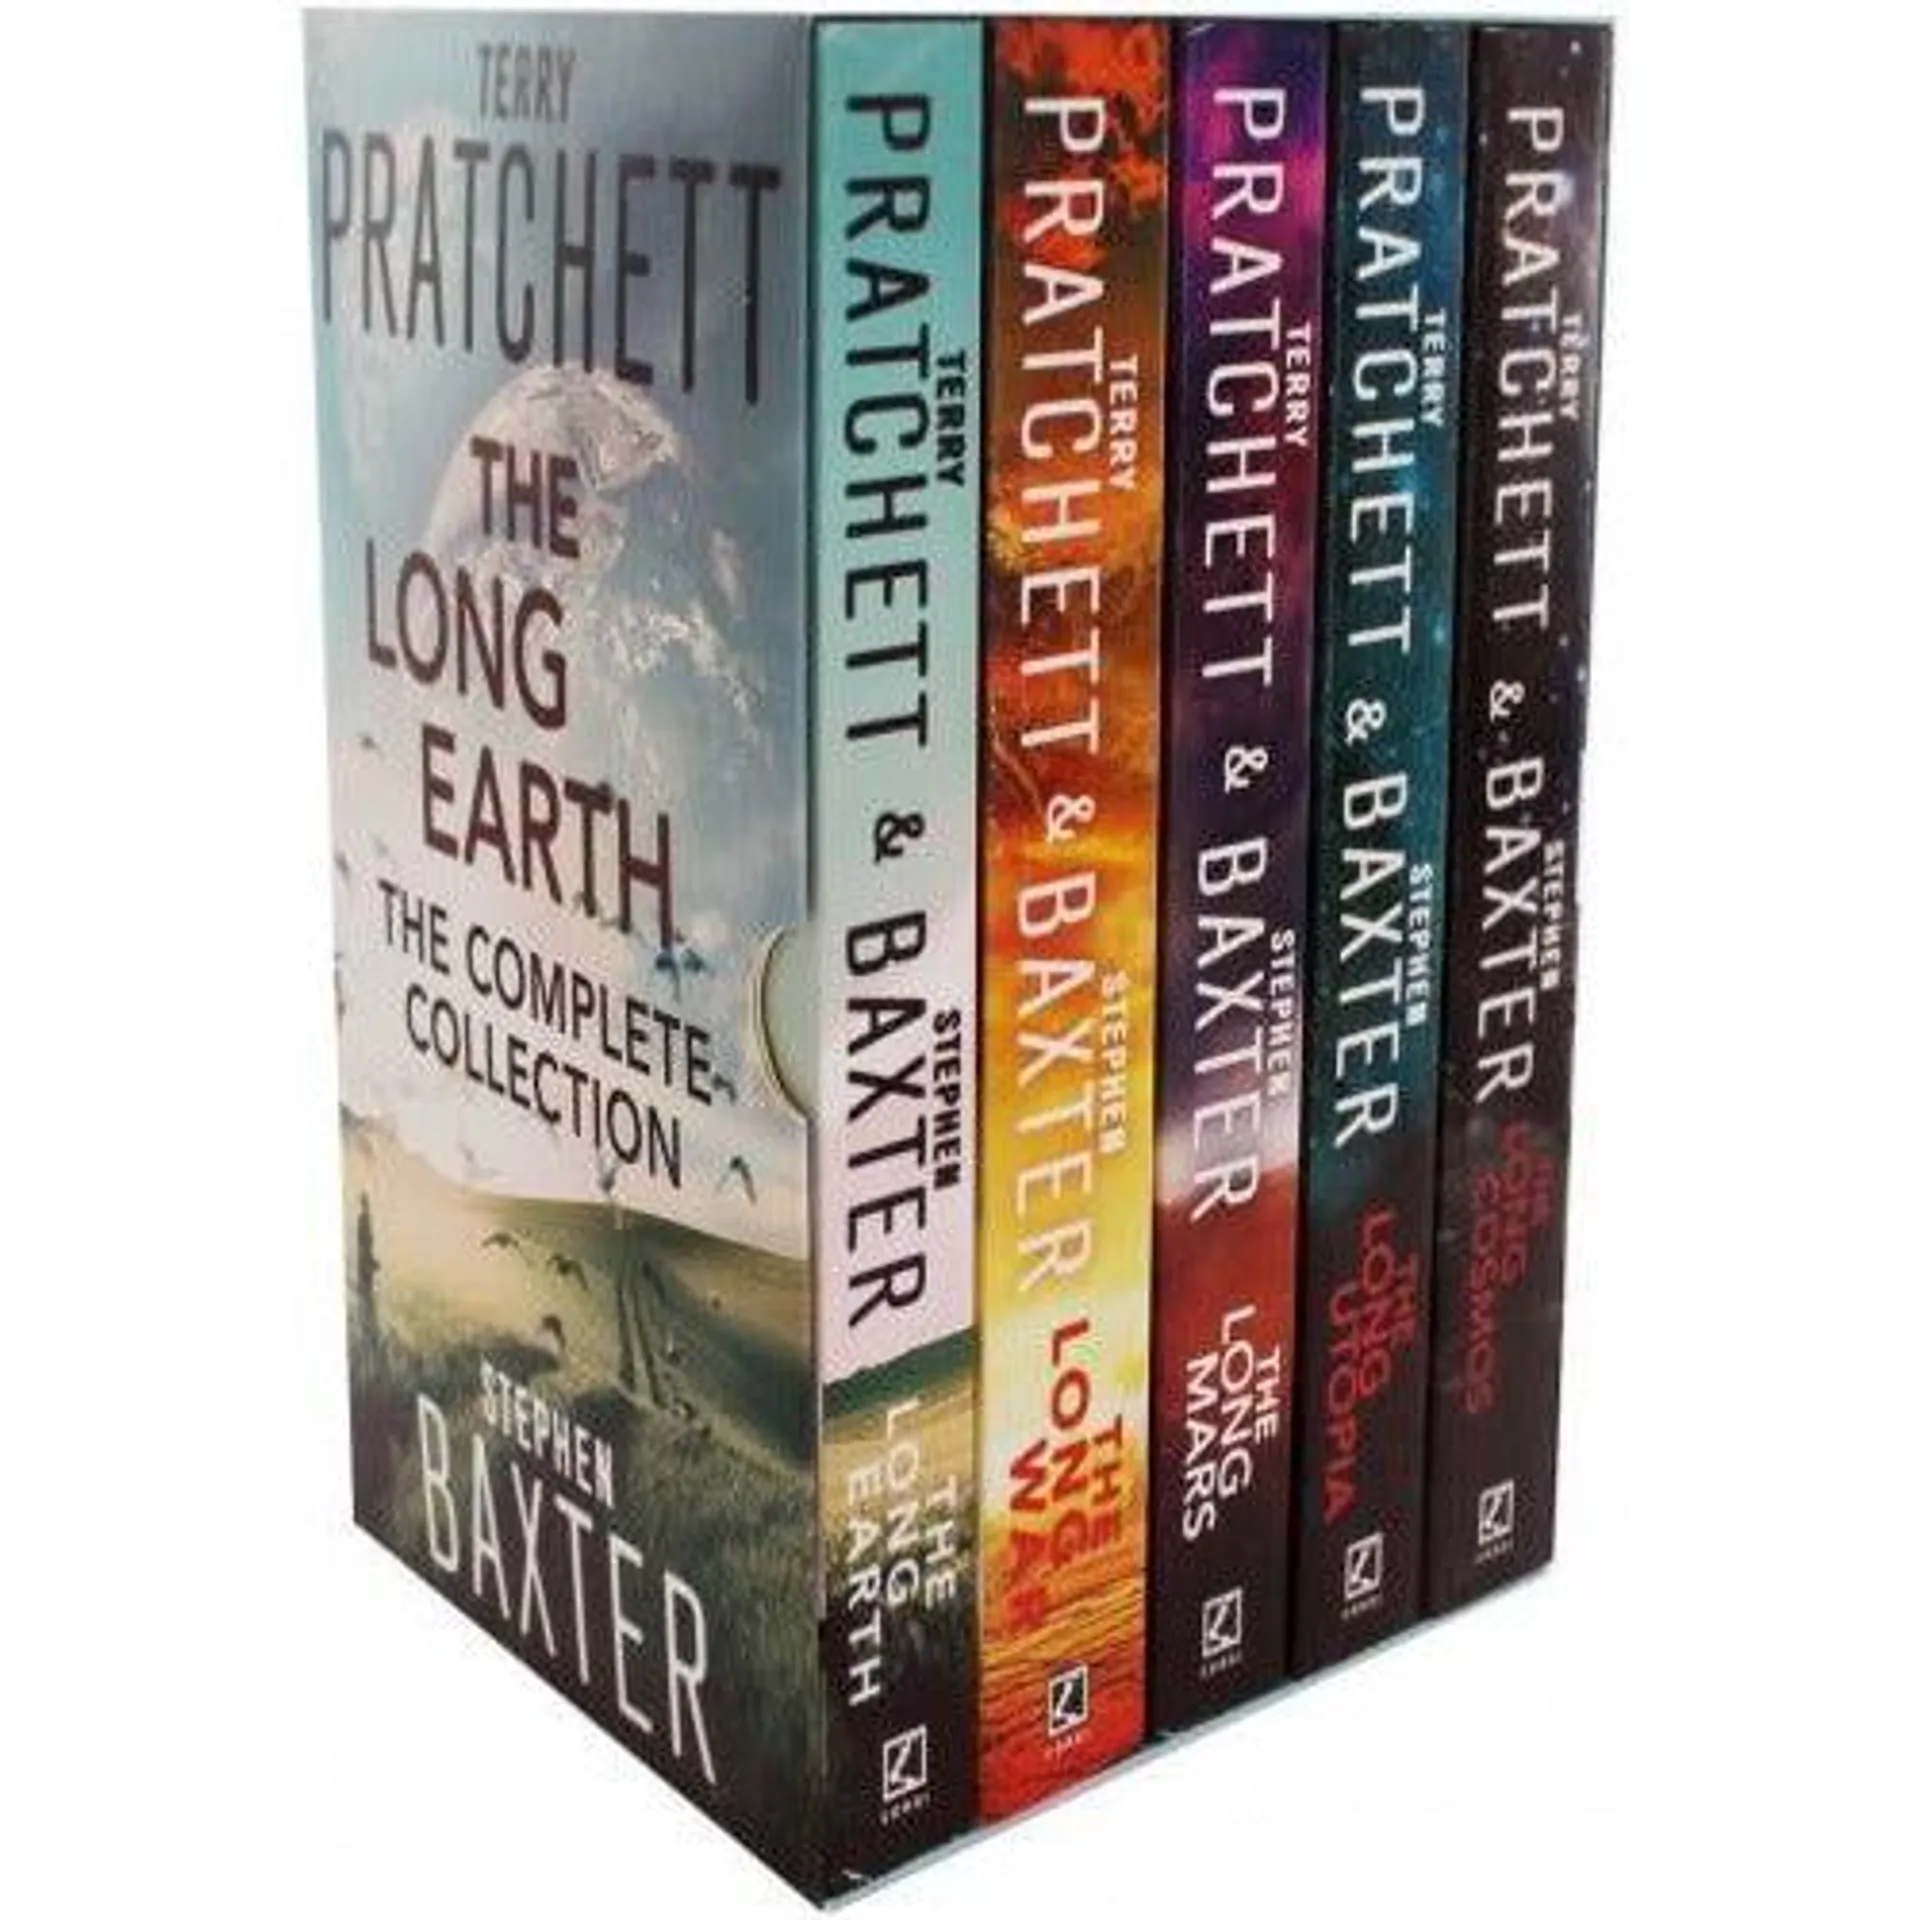 The Long Earth 5 Books Collection Set by Terry Pratchett & Stephen Baxter (The long earth, The long war, The long mars, The long utopia, The long cosmos)